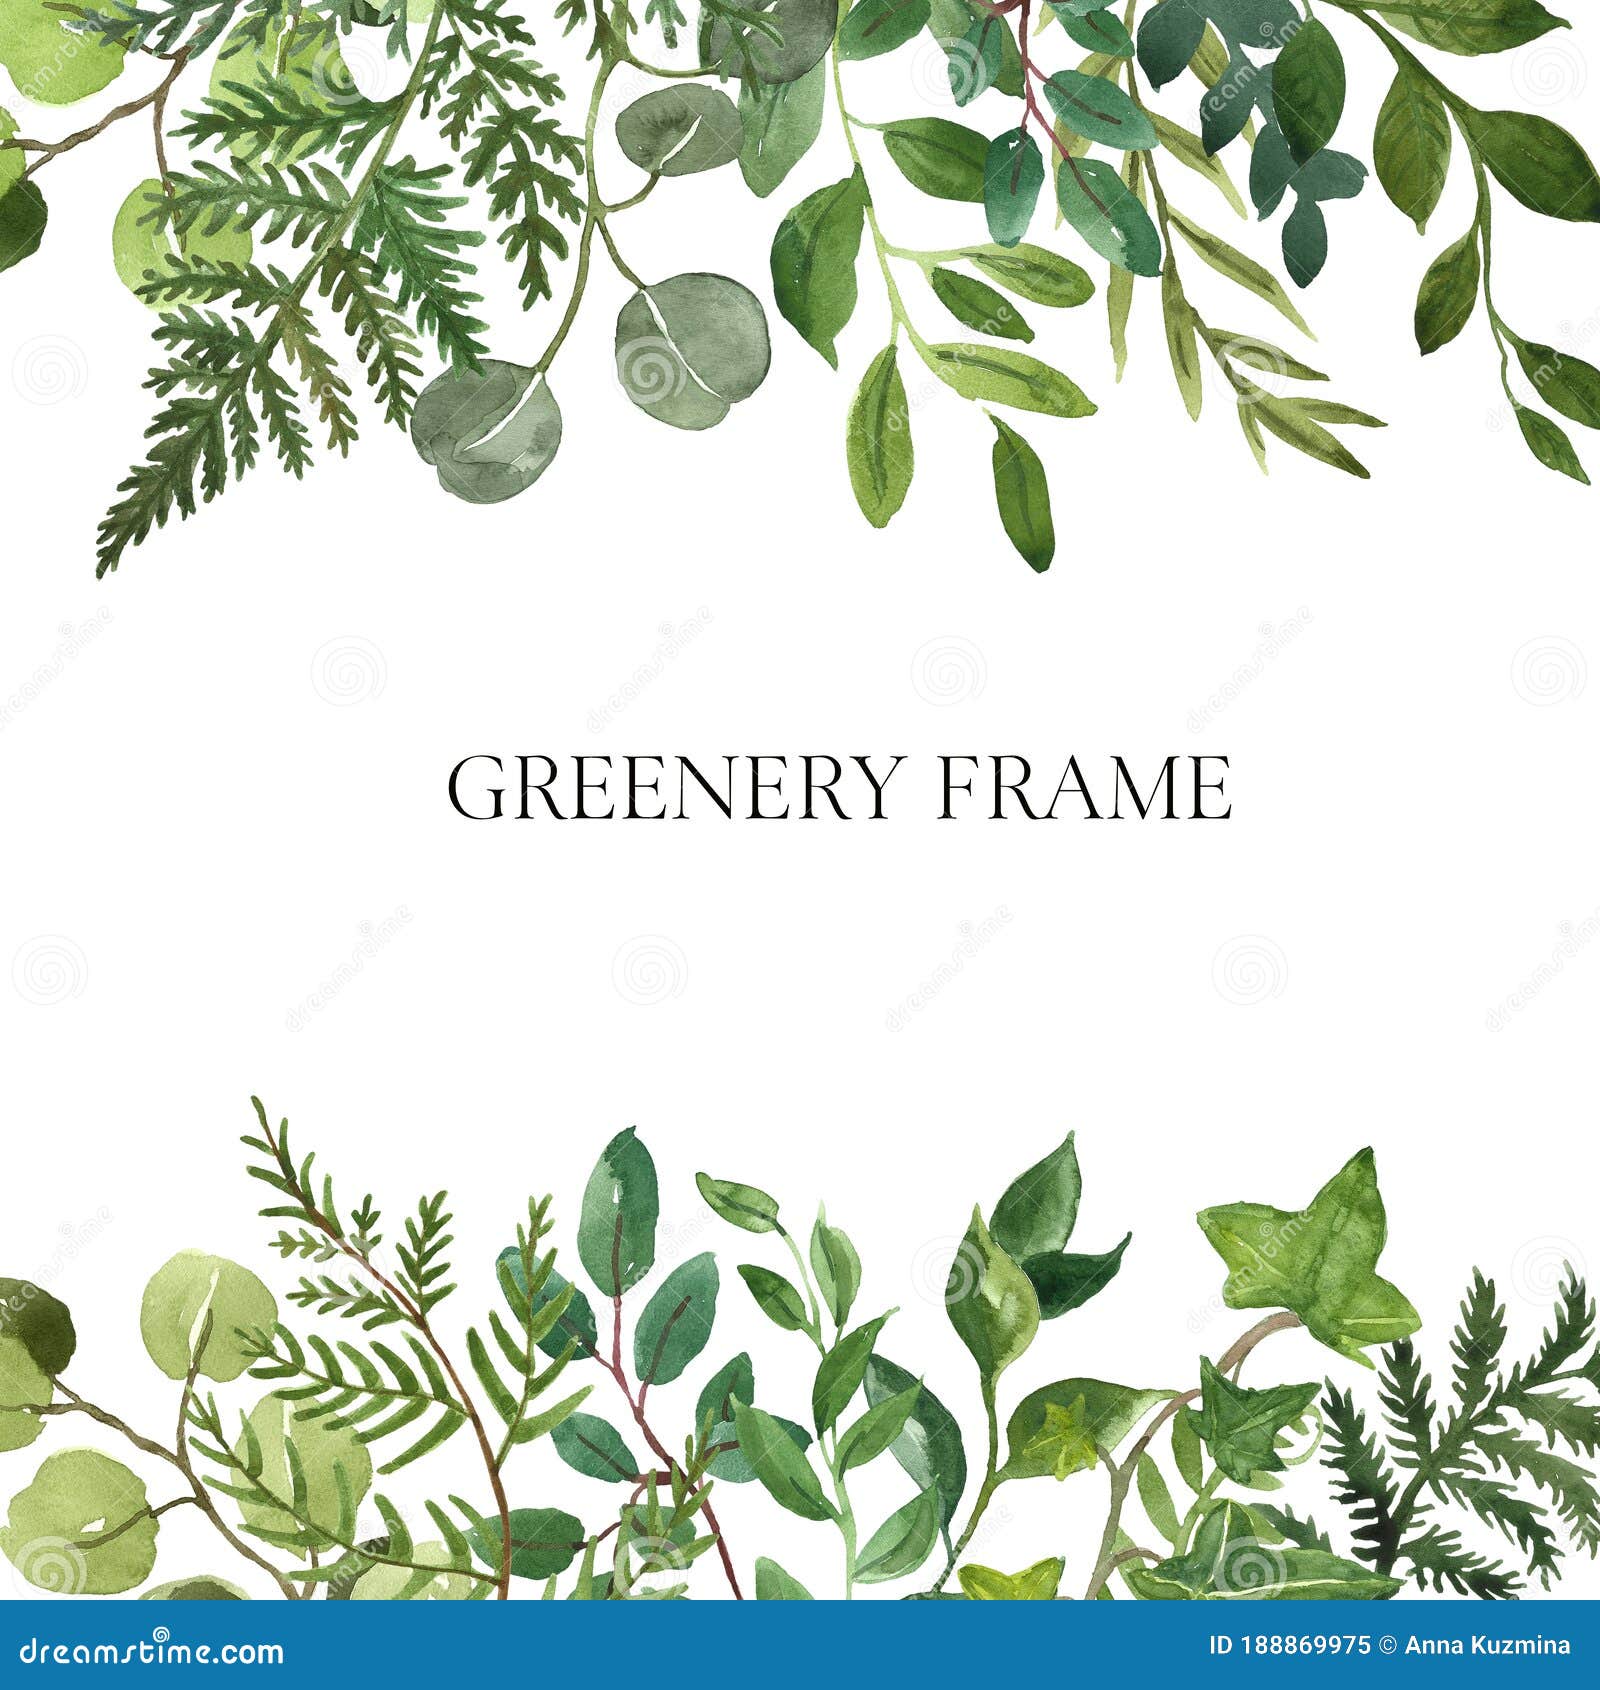 watercolor botanical frame with lush greenery, herbs and green leaves on white background. modern foliage frame. floral invitation